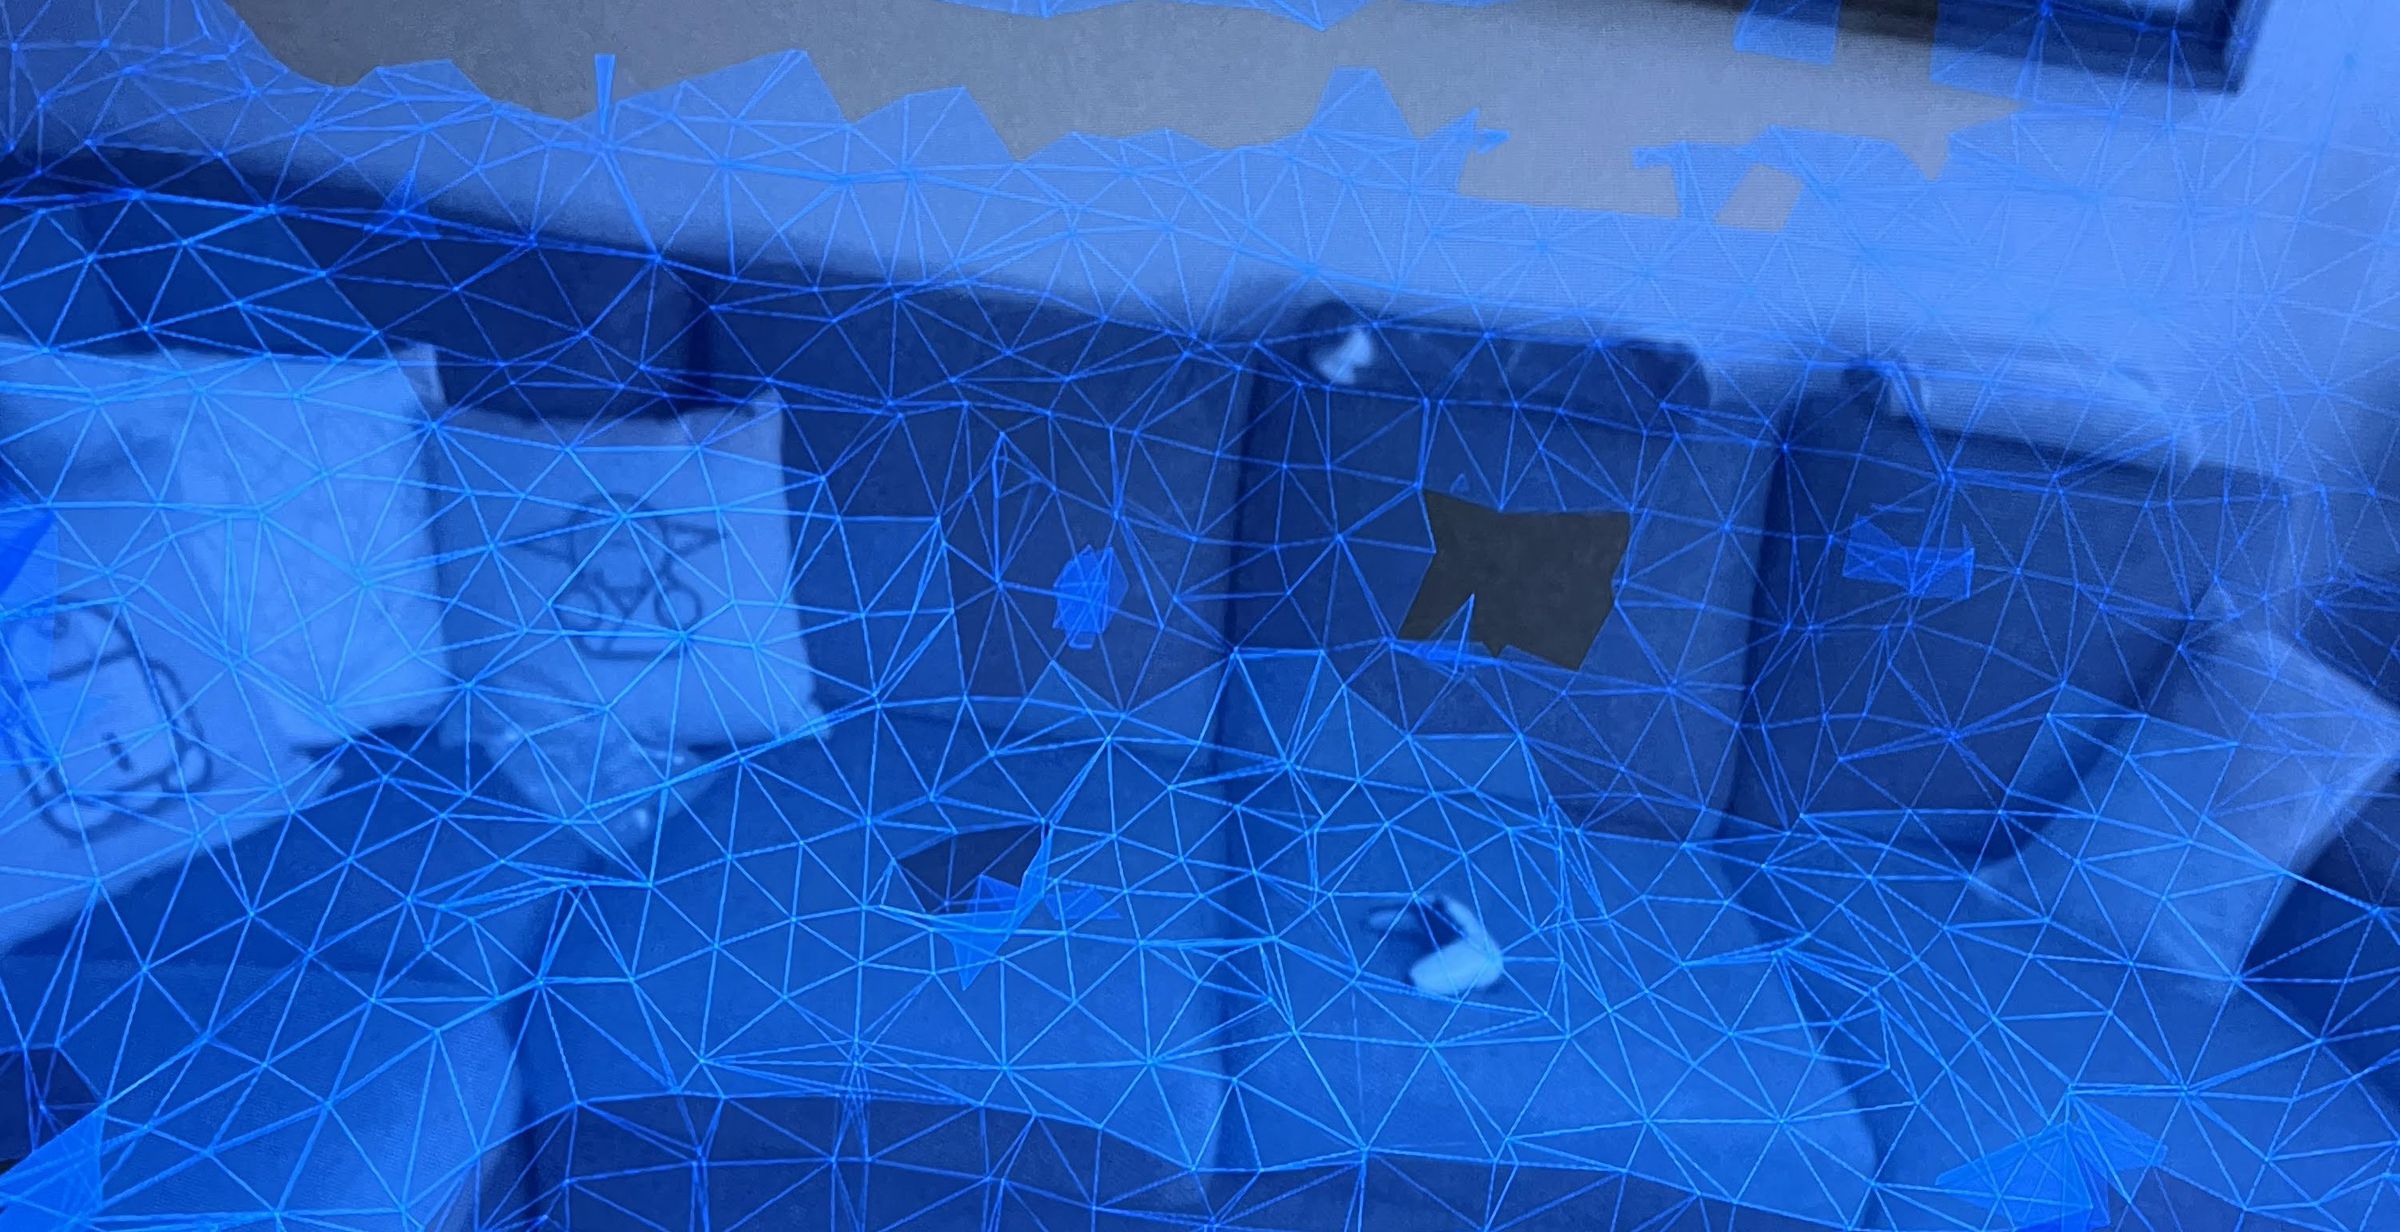 The couch live view is covered in a blue triangular mesh.